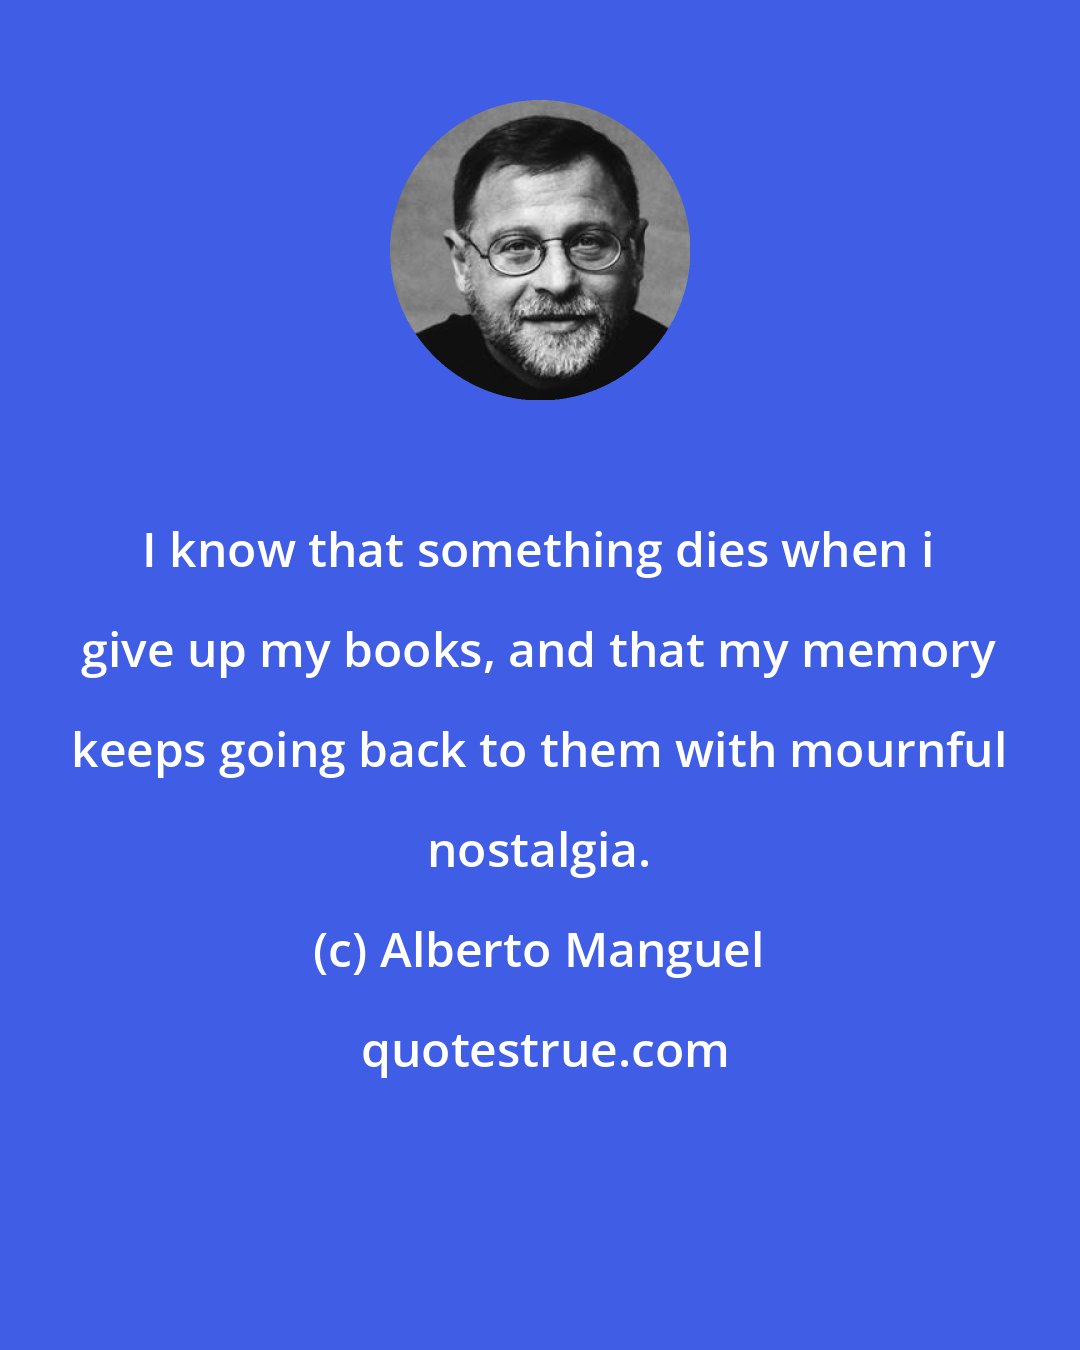 Alberto Manguel: I know that something dies when i give up my books, and that my memory keeps going back to them with mournful nostalgia.